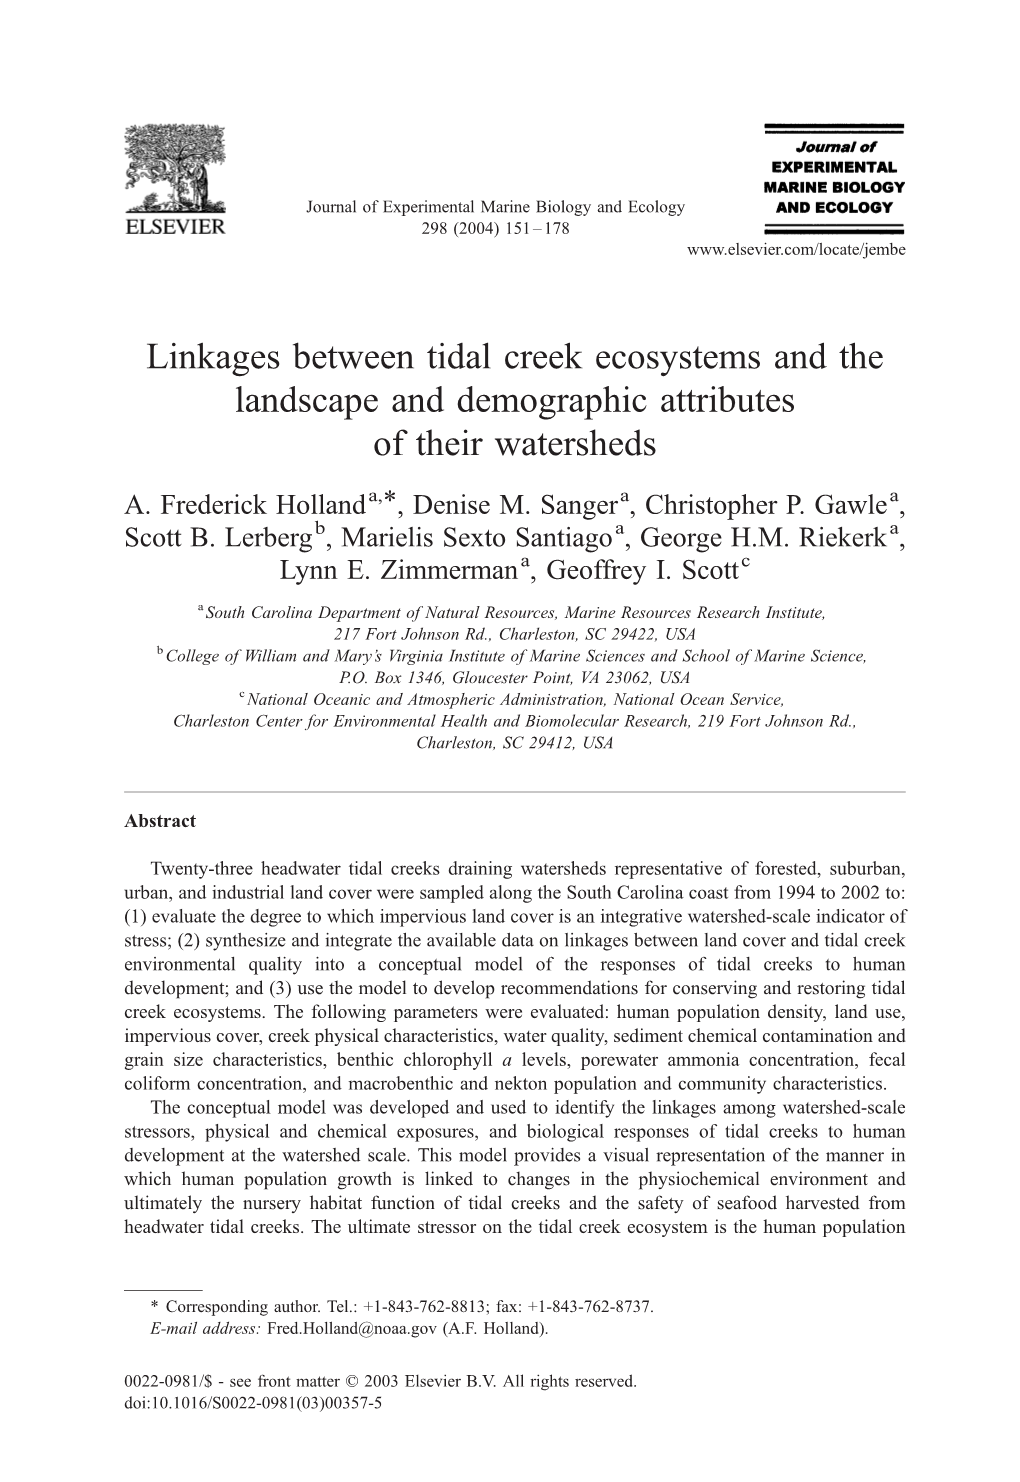 Linkages Between Tidal Creek Ecosystems and the Landscape and Demographic Attributes of Their Watersheds